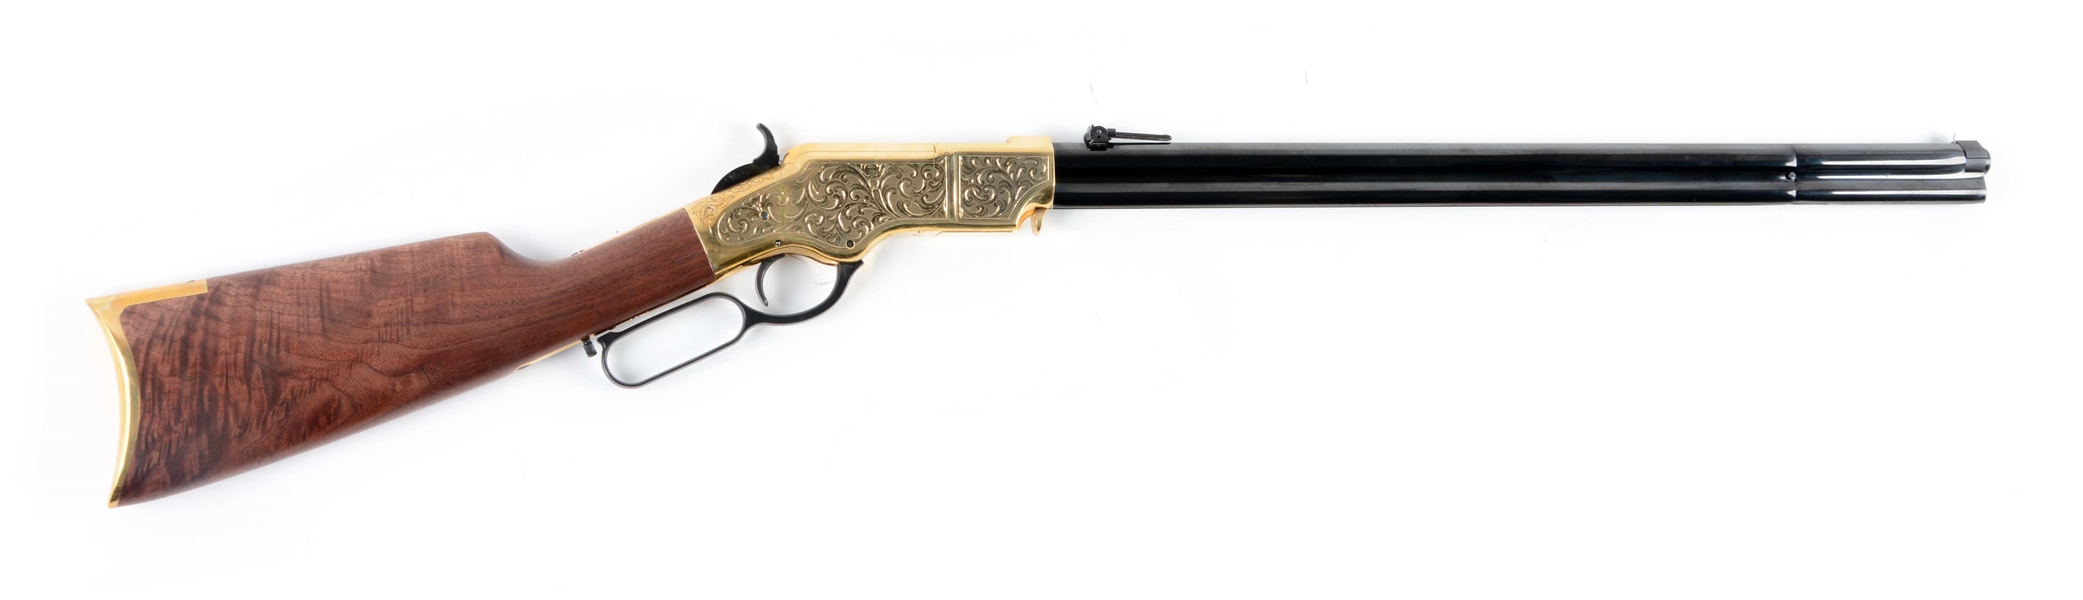 (M) LIMITED EDITION HENRY ORIGINAL DELUXE ENGRAVED 2ND EDITION LEVER ACTION RIFLE.